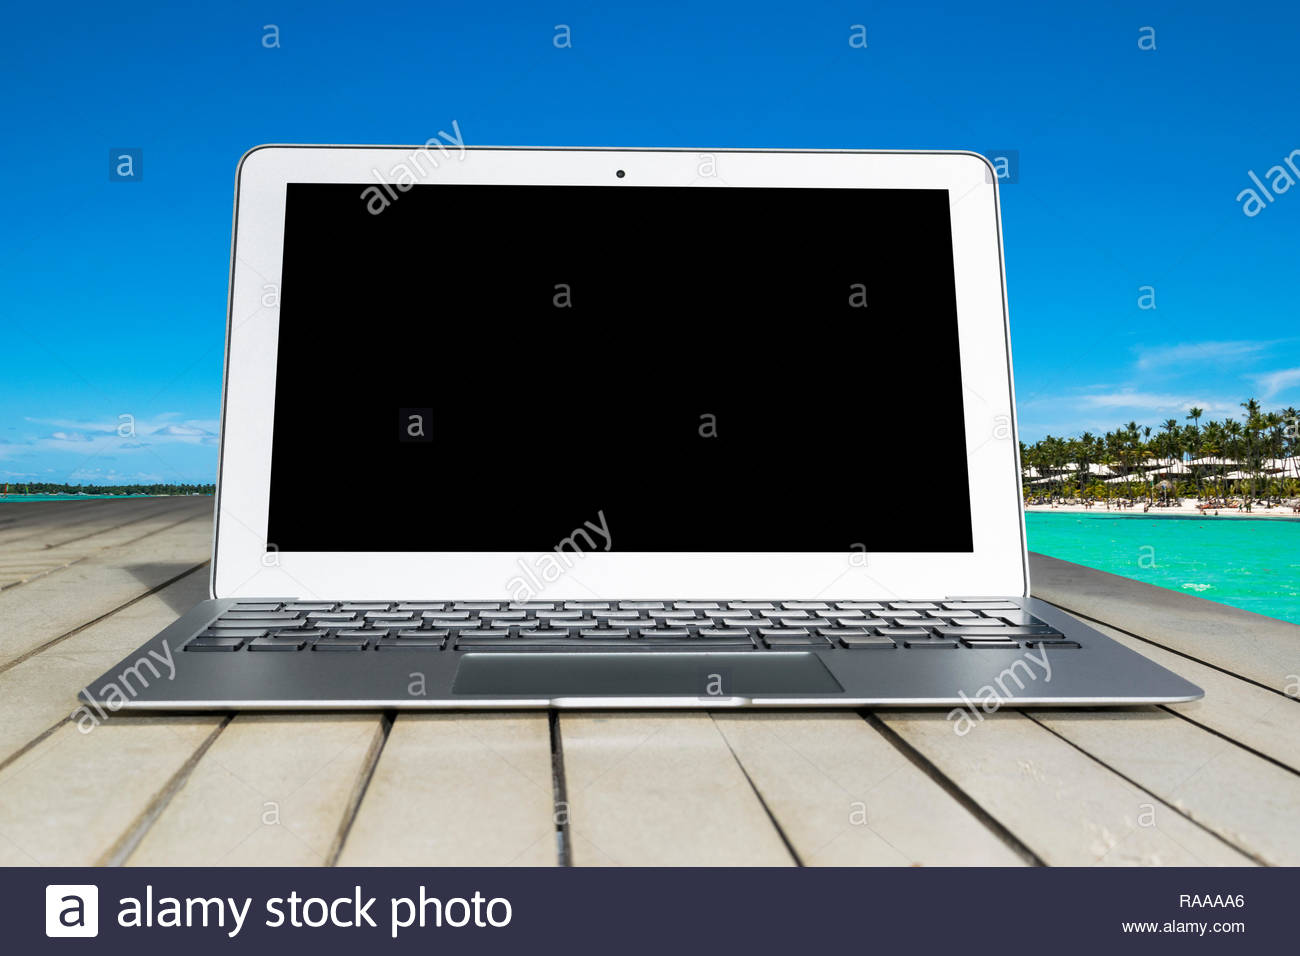 Laptop Puter On Wooden Table Top Ocean Tropical Island